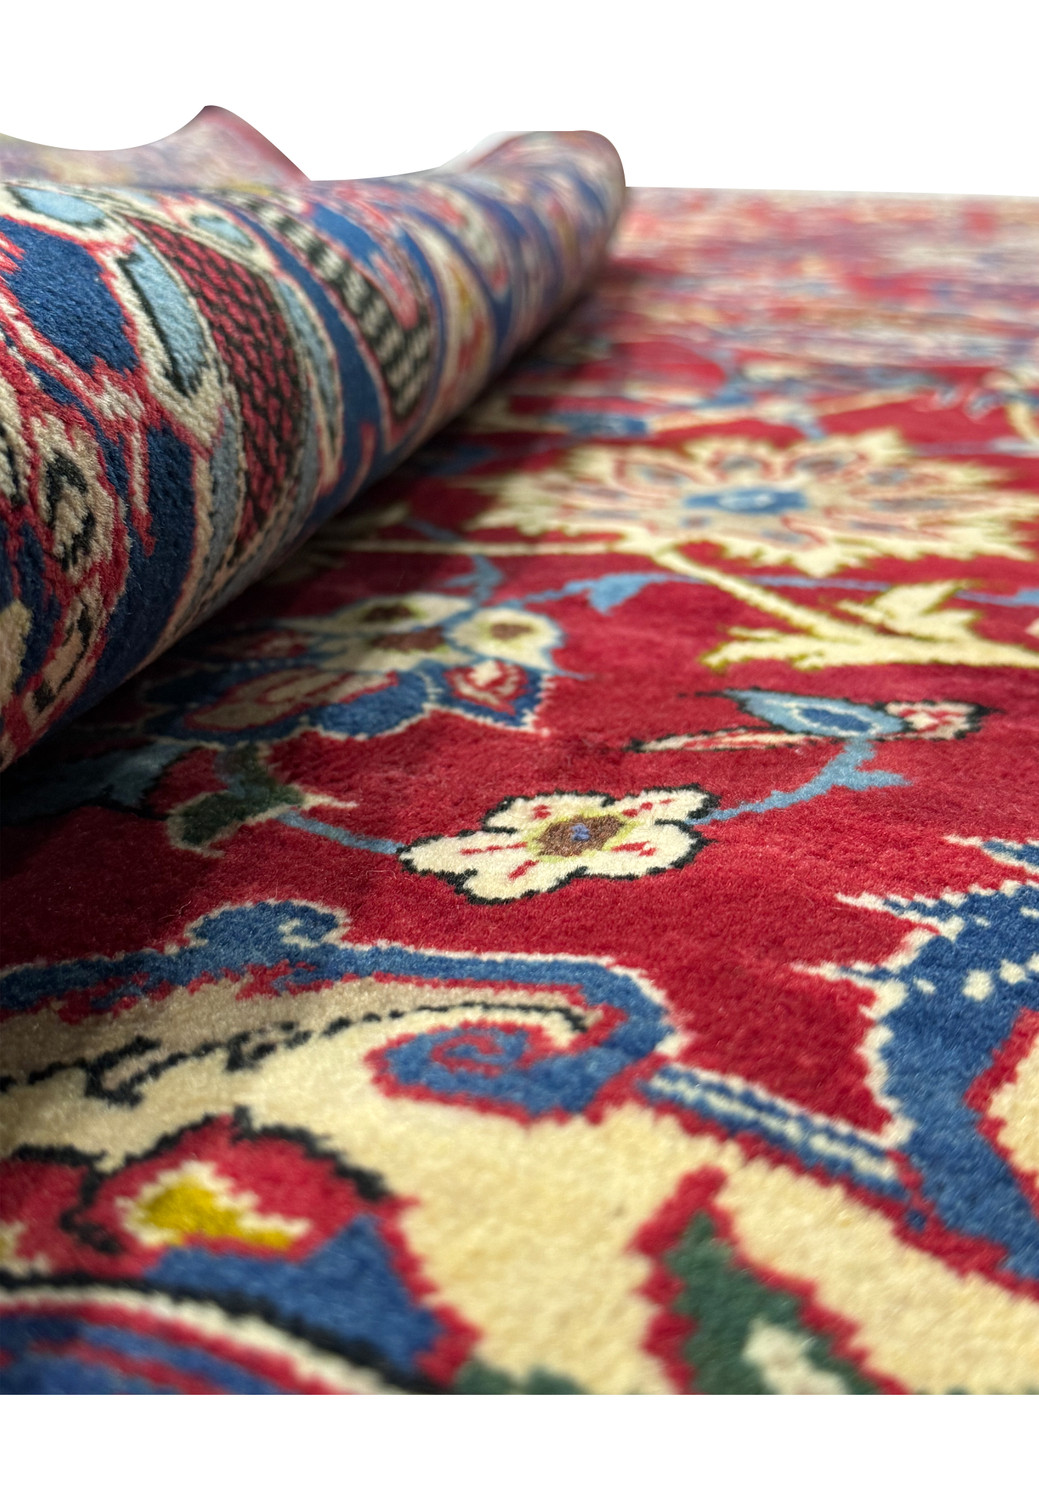 A full view of a 10 x 15'6" Persian Isfahan rug, with a detailed floral pattern spread across a crimson field and surrounded by a navy blue intricate border